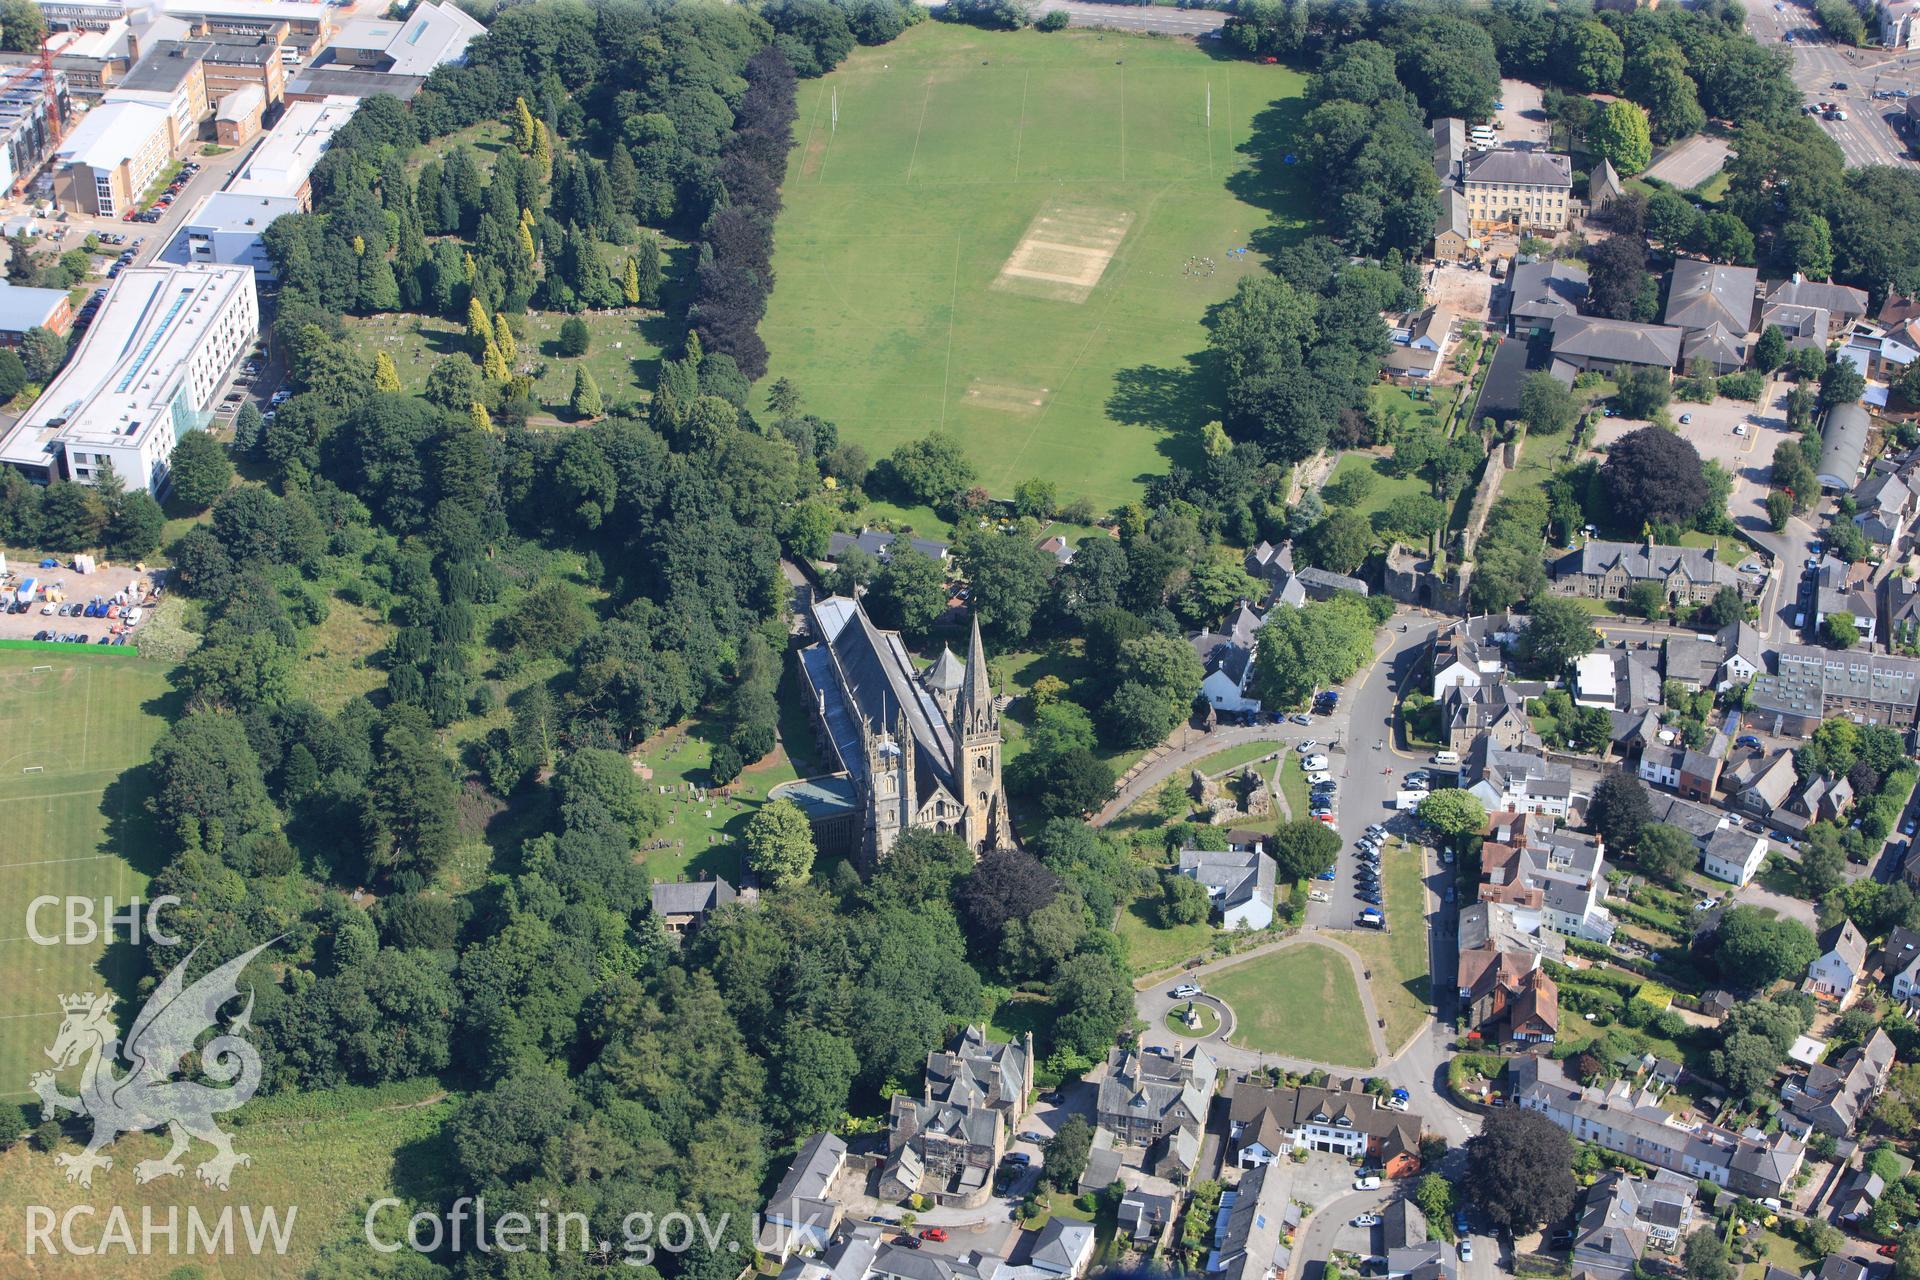 Llandaff Cathedral & its school; Bishop's Castle; Old Bishop's Palace; Institute of Higher Education & Pontcanna Fields, Cardiff. Oblique aerial photograph taken during RCAHMW?s programme of archaeological aerial reconnaissance by Toby Driver, 1 Aug 2013.